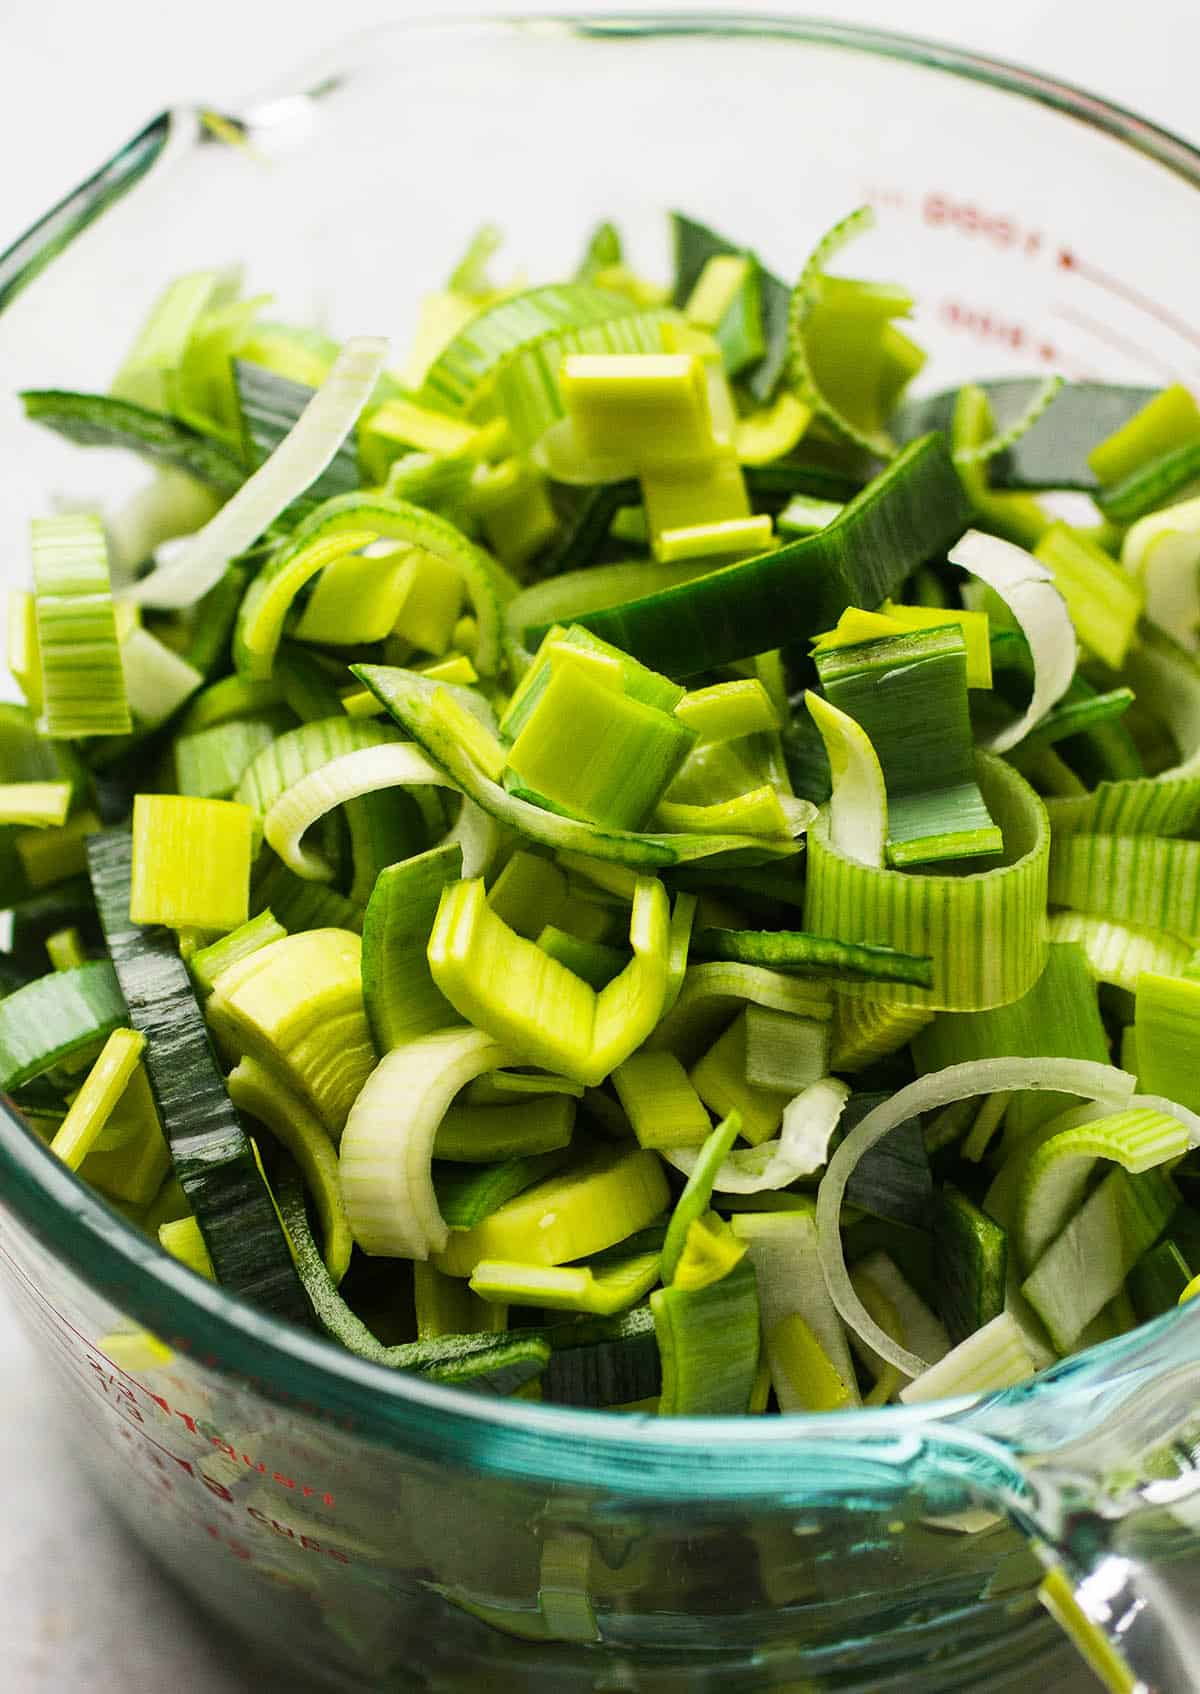 Sliced leeks in a large glass measuring cup.